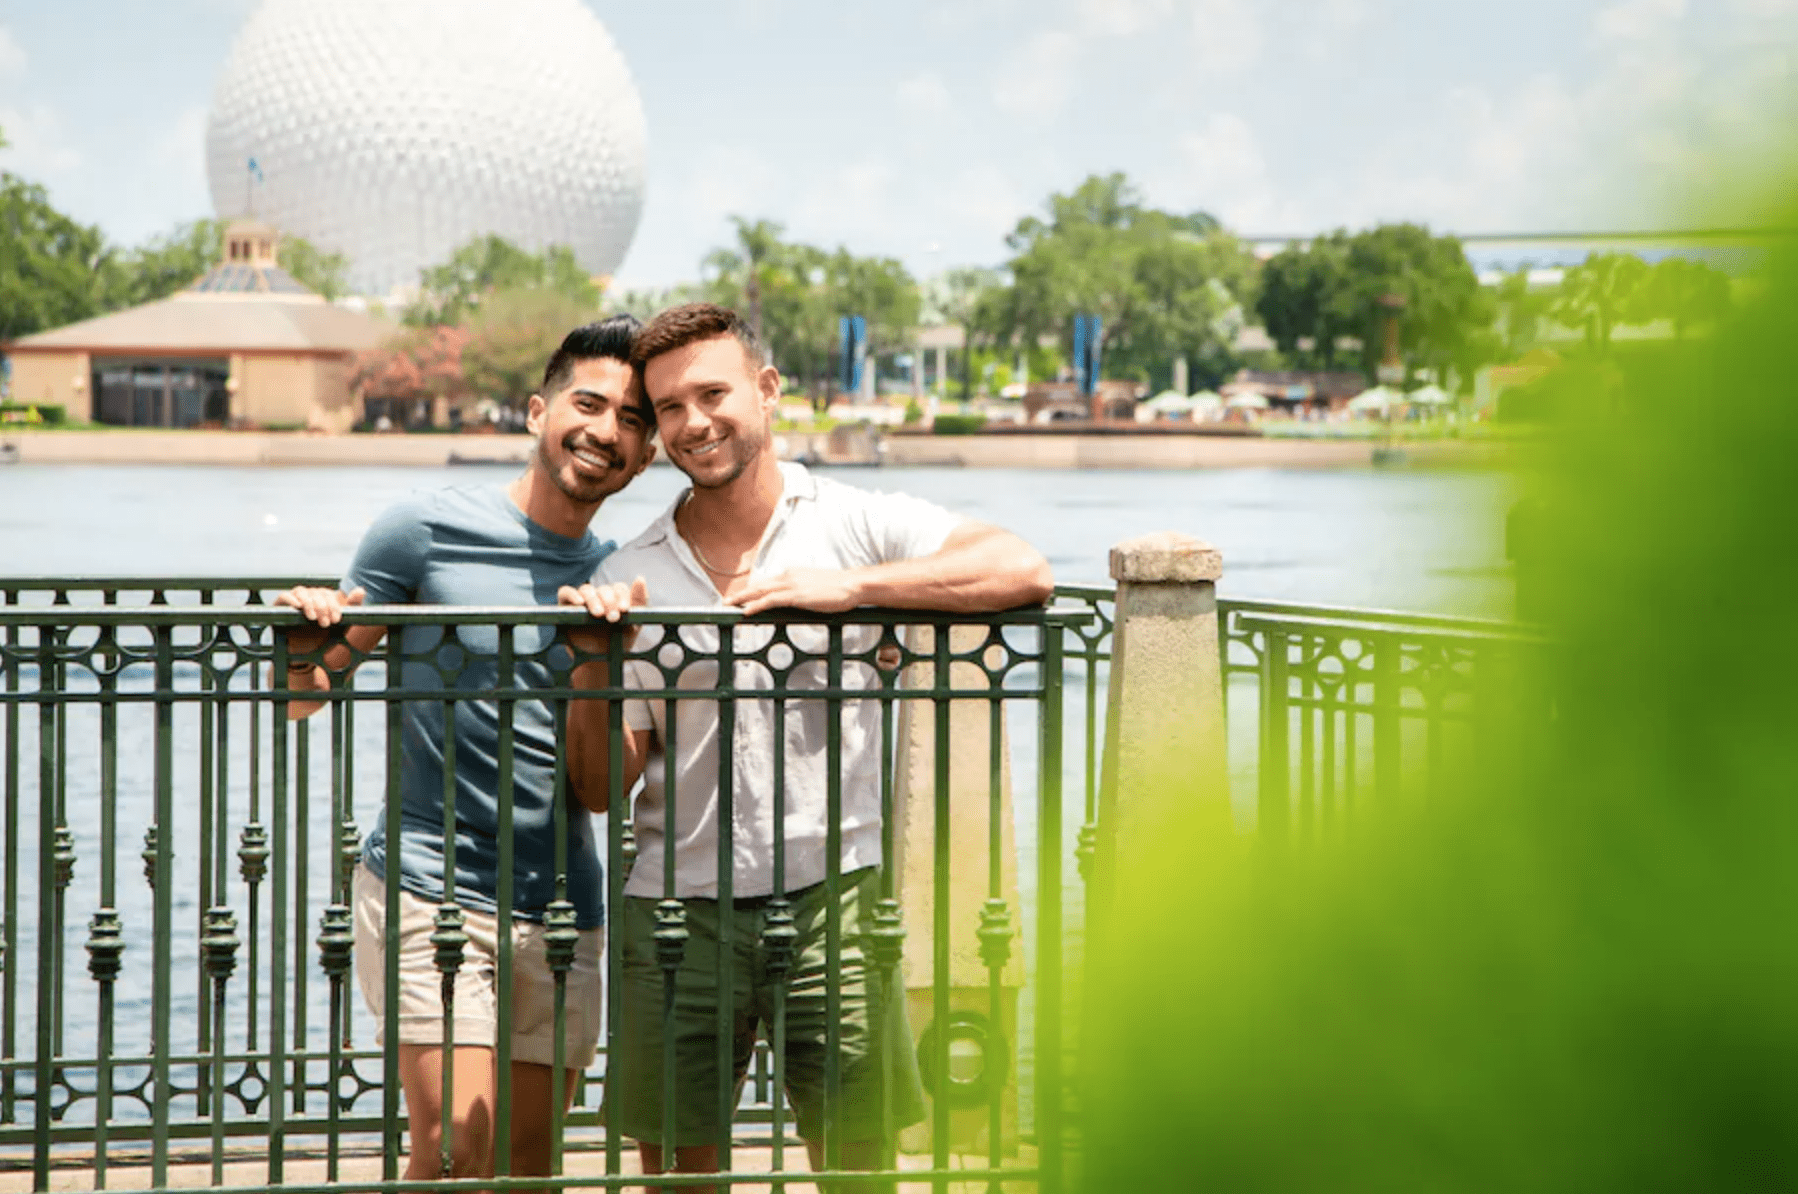 Capture Your Moment Sees Price Increase As It Comes To Epcot & Hollywood Studios